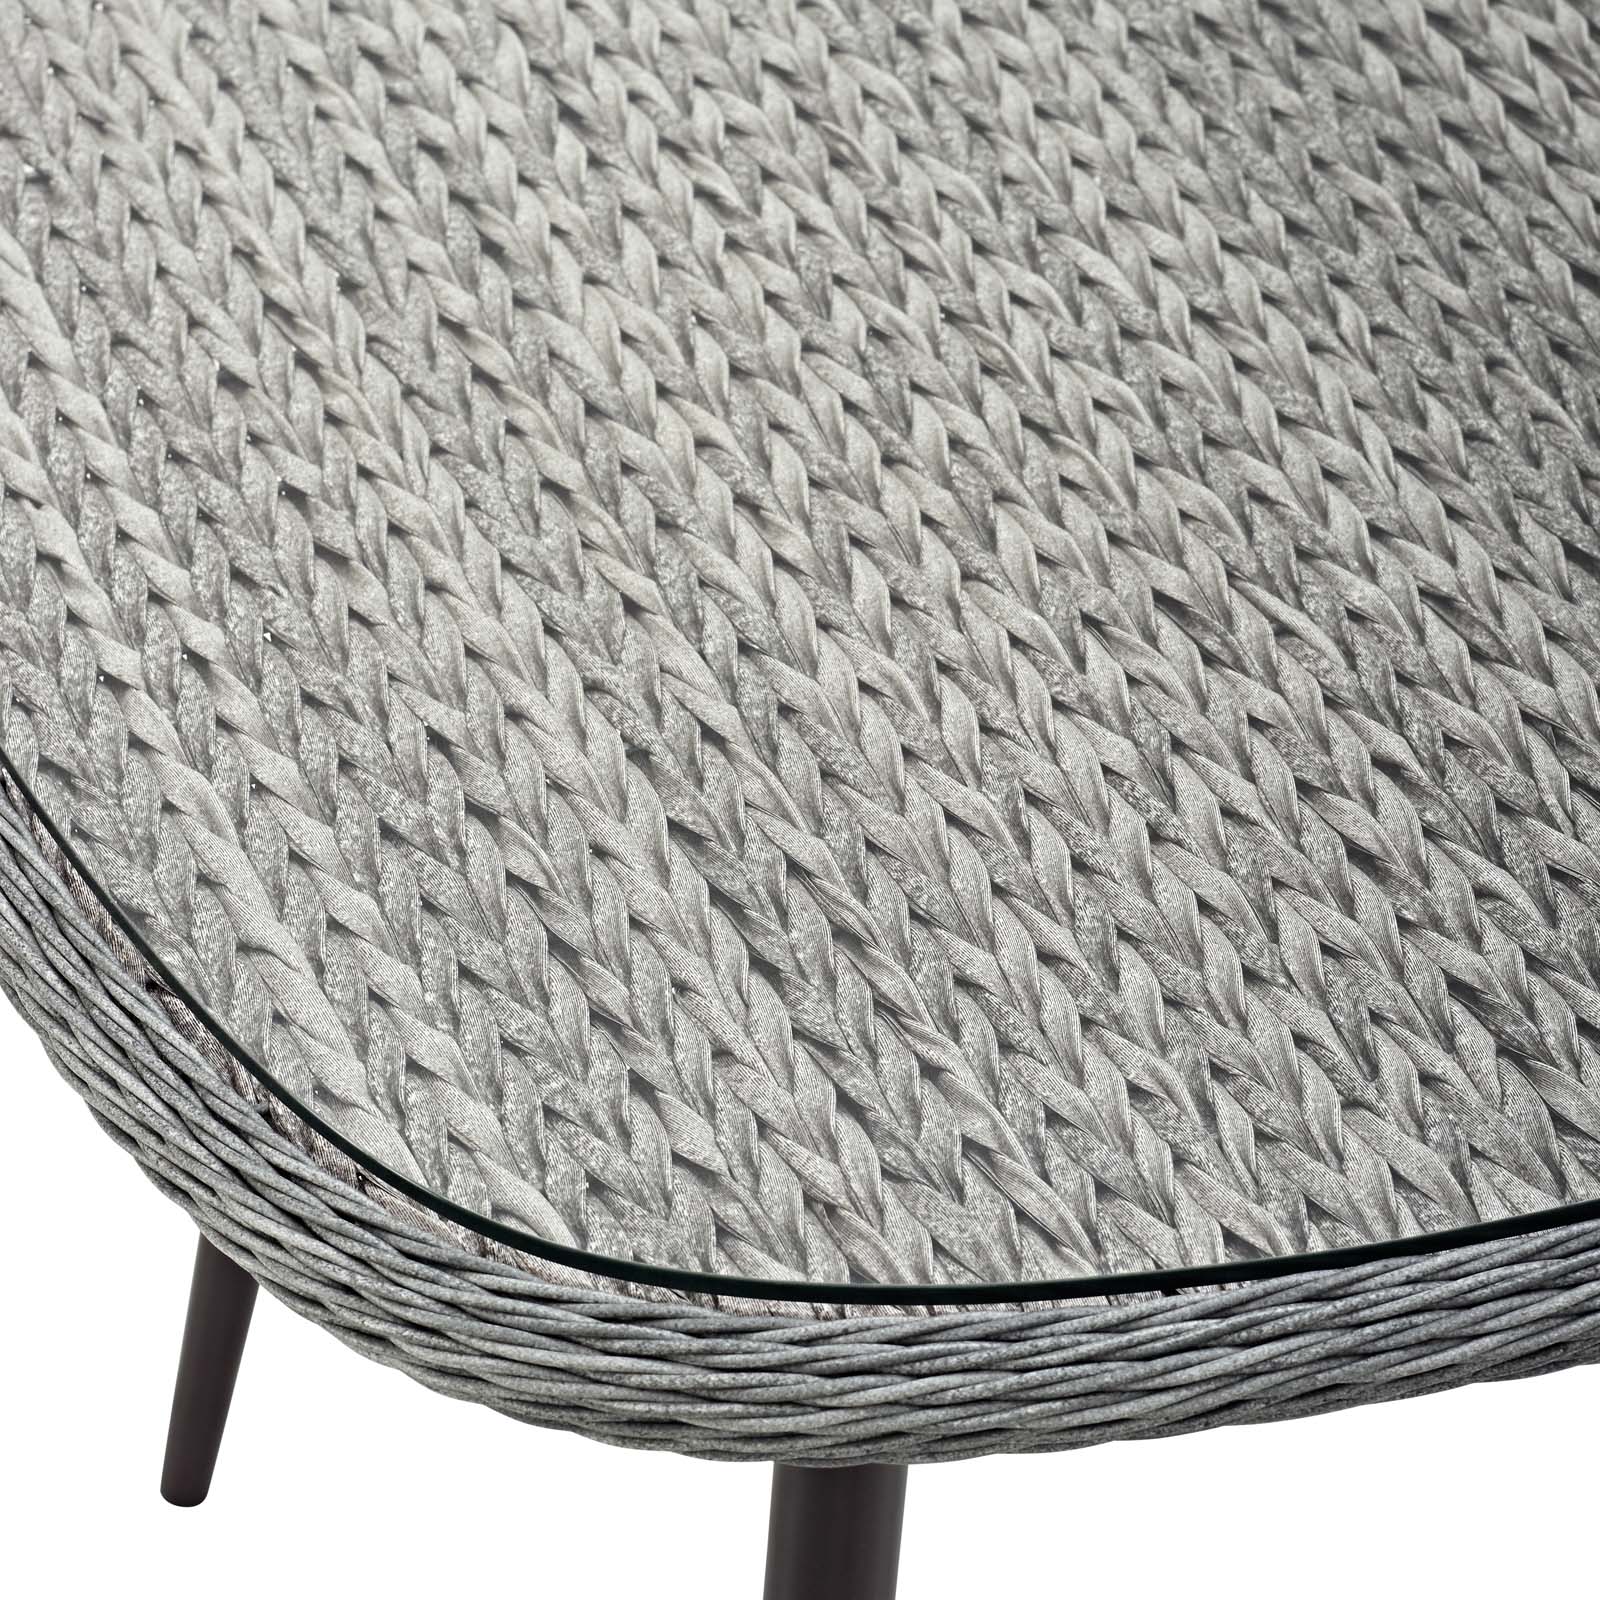 Modway Endeavor 36" Outdoor Patio Wicker Rattan Dining Table in Gray - image 5 of 5